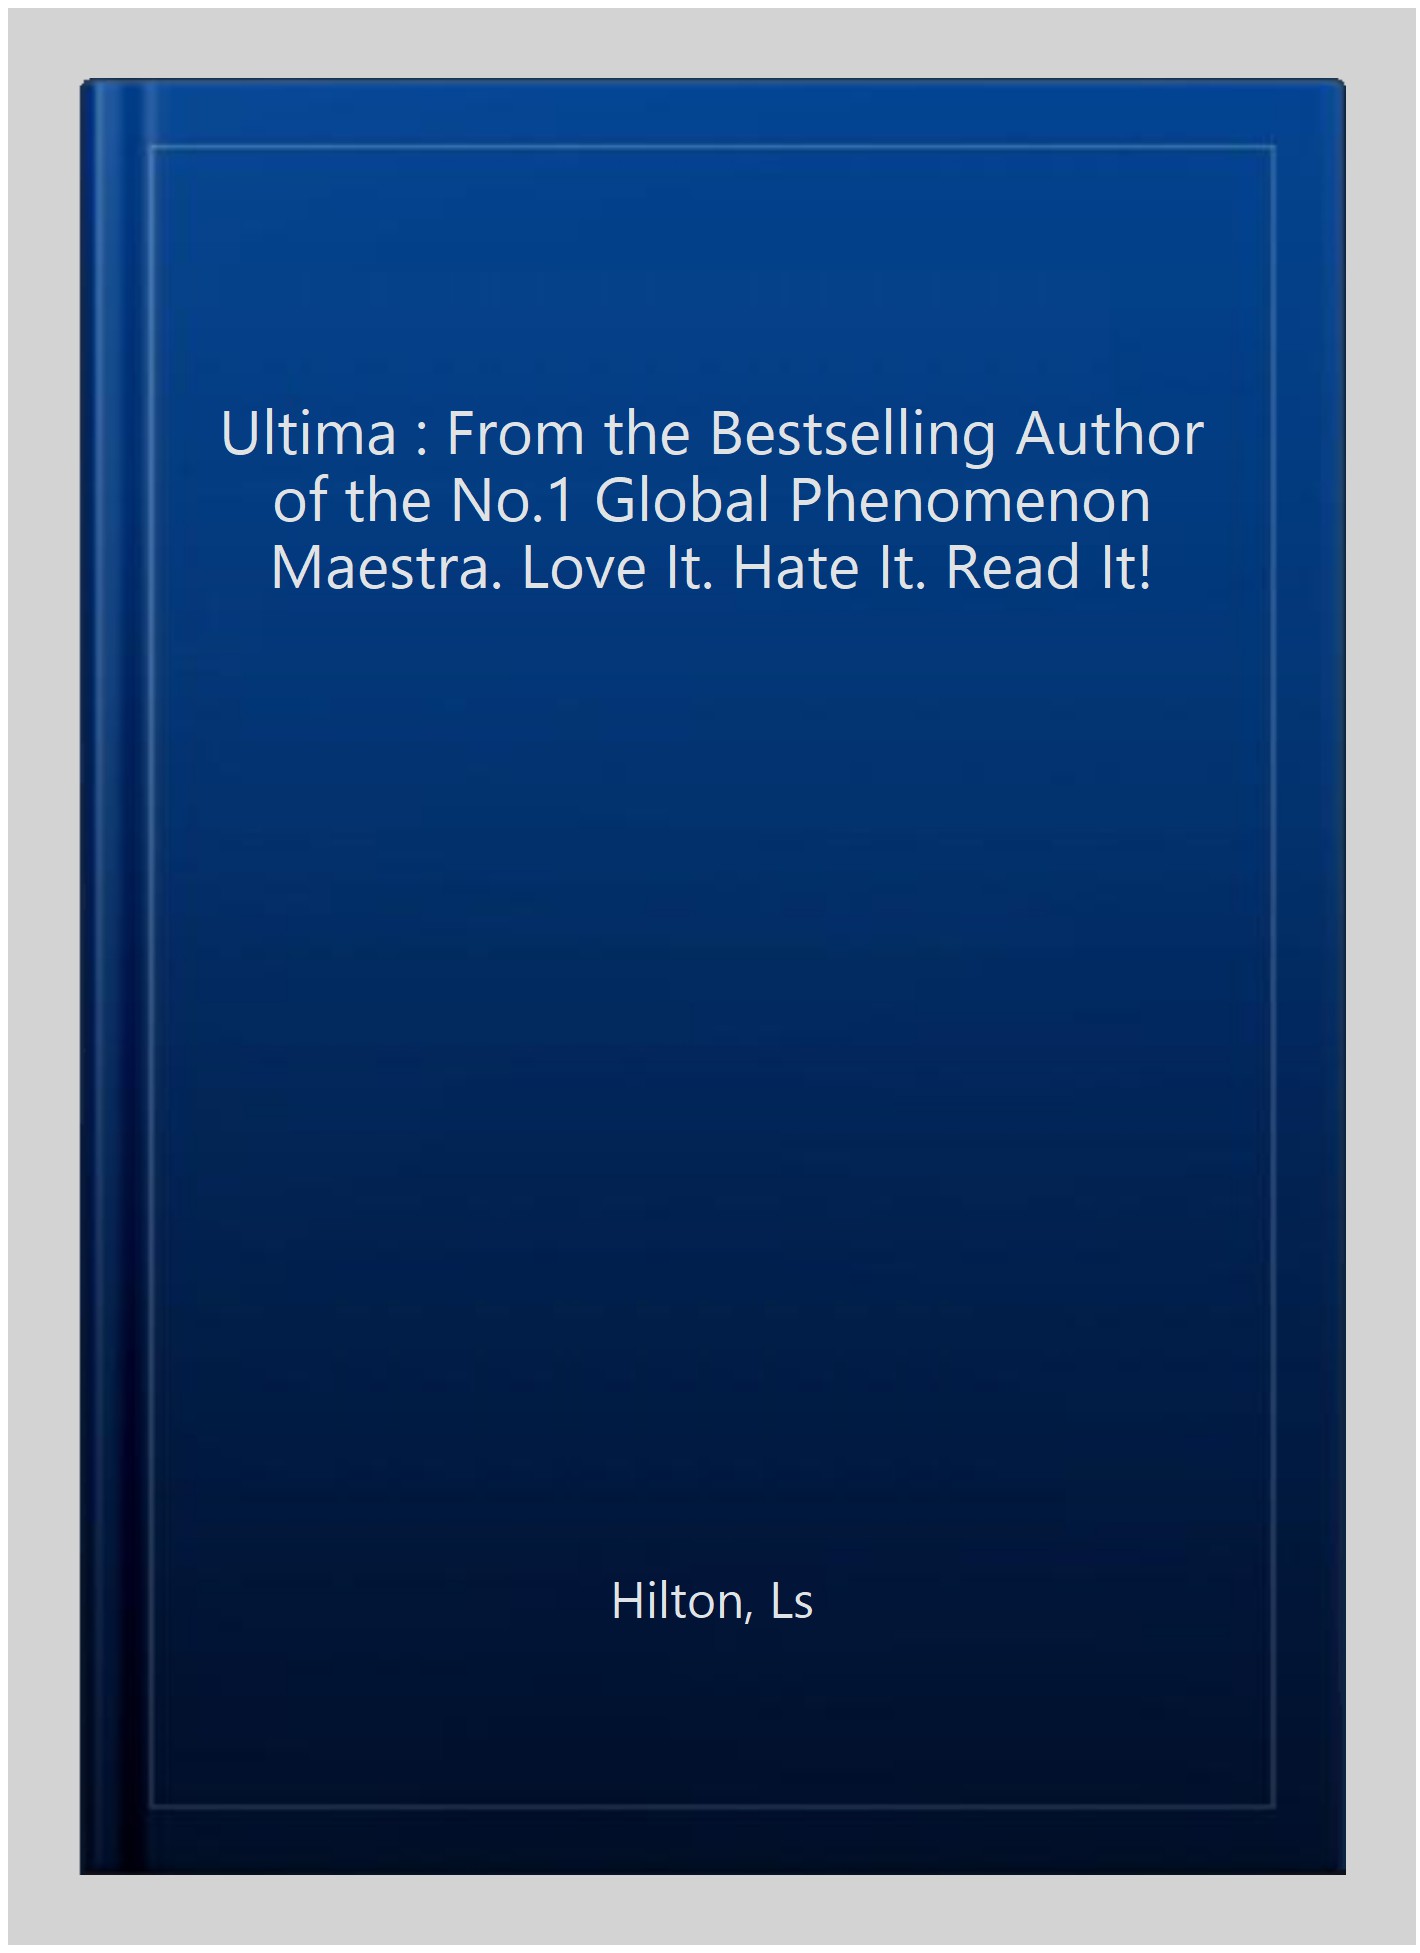 Ultima : From the Bestselling Author of the